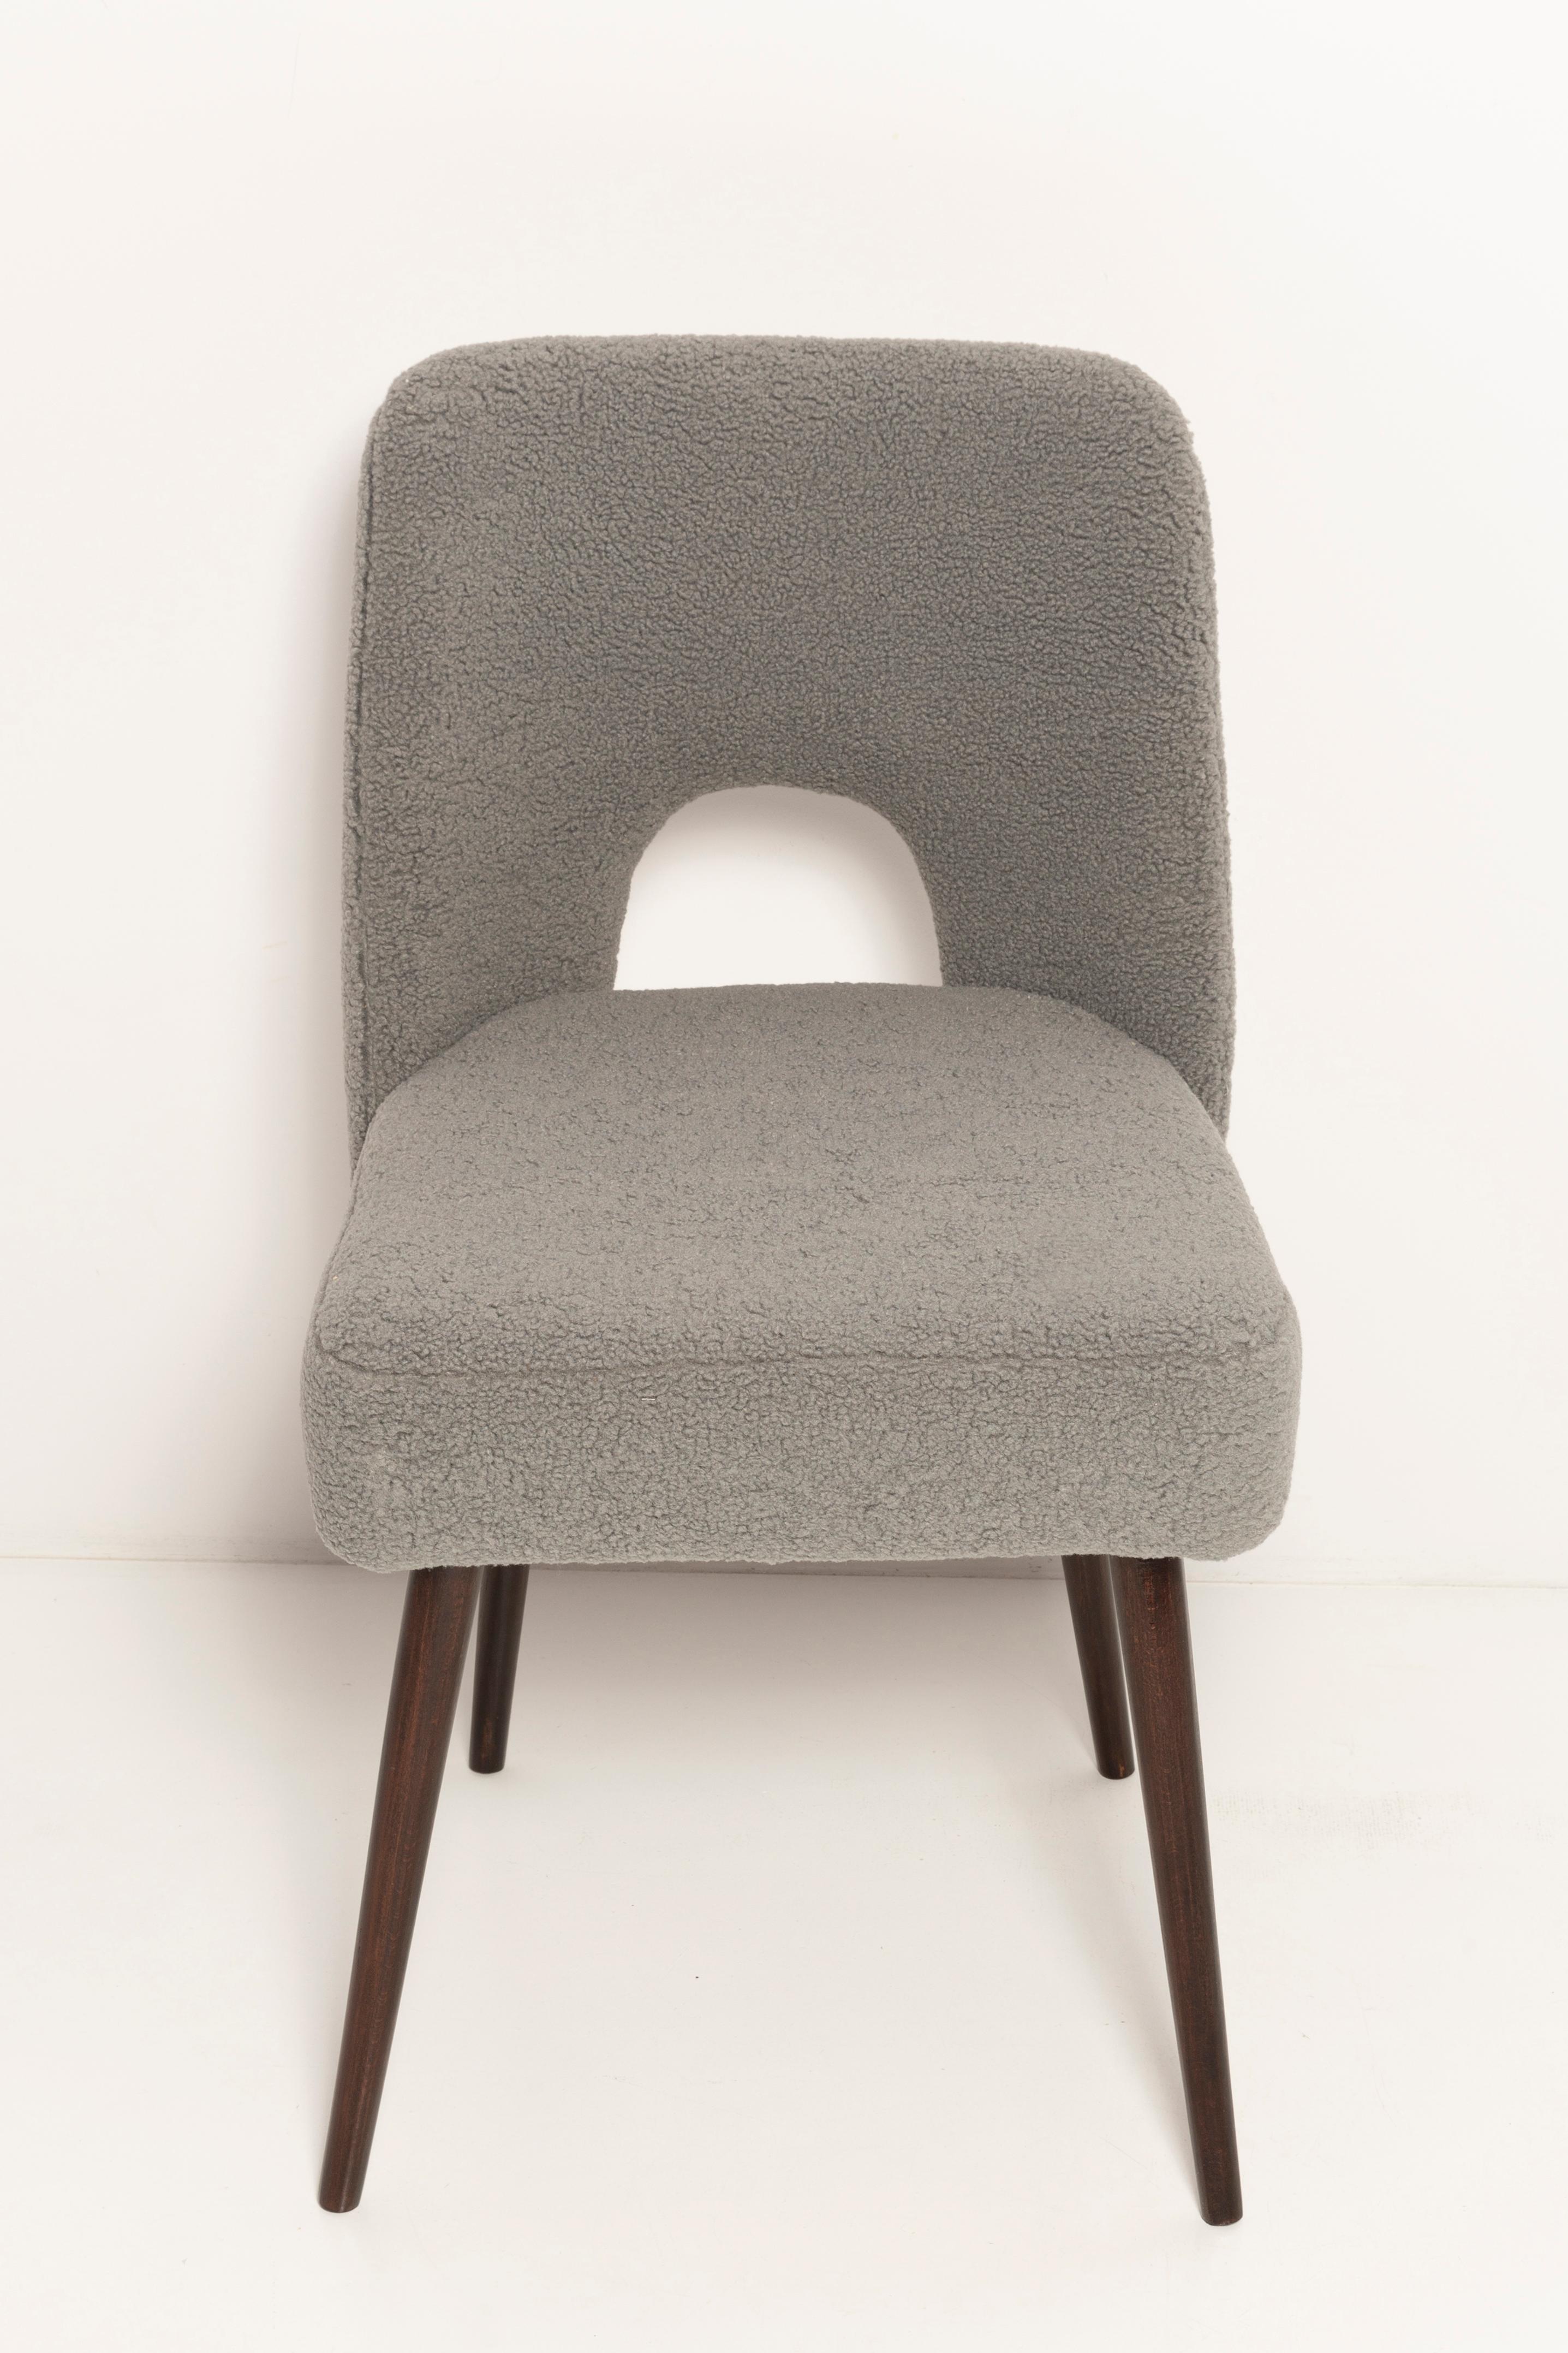 Set of Nine Gray Boucle 'Shell' Chairs, Europe, 1960s For Sale 2